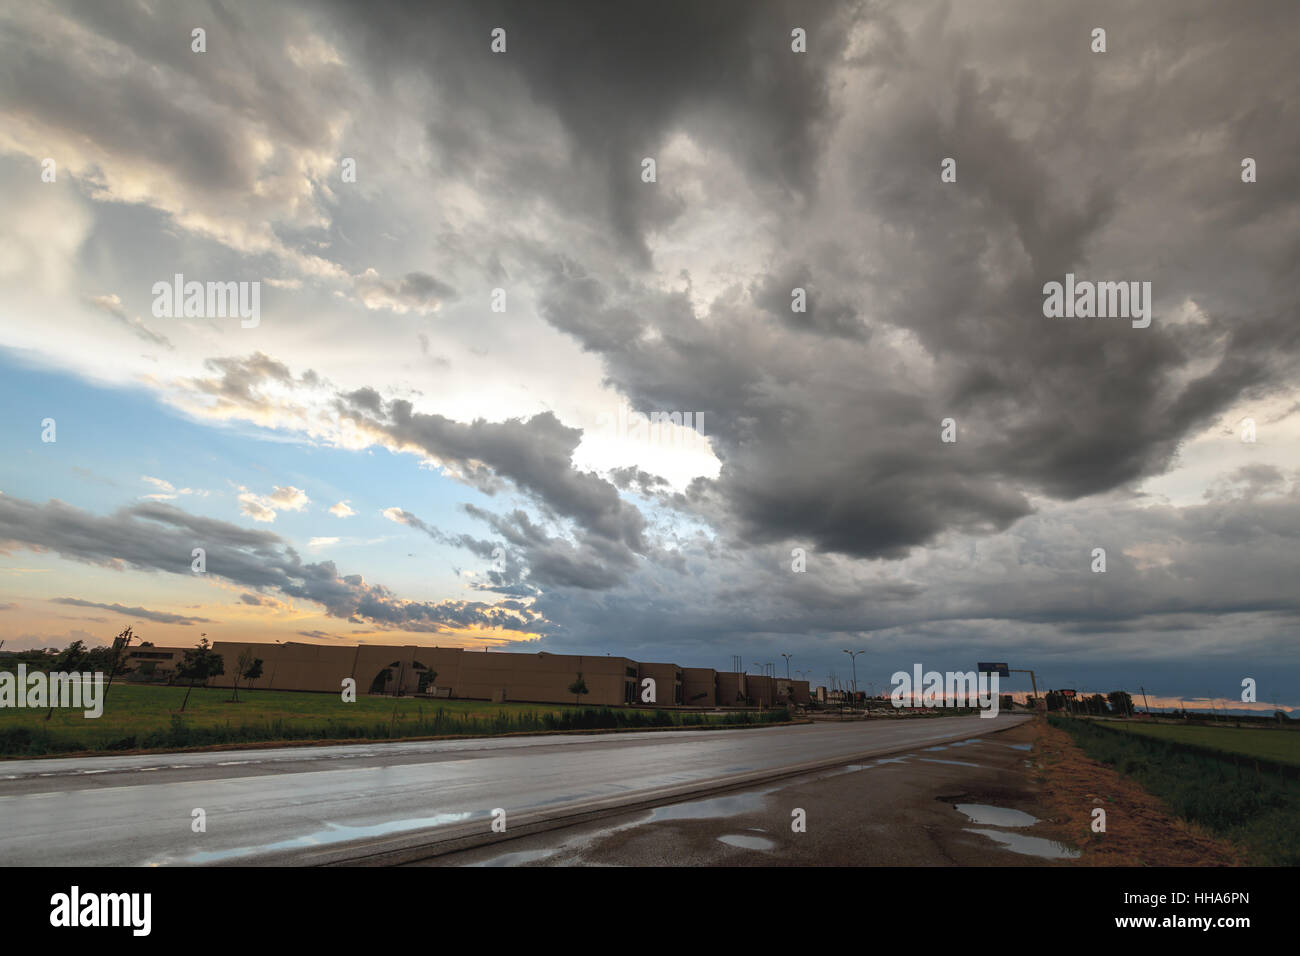 Strange dramatic gray clouds  shapes formed after a storm in Ferrara Italy Stock Photo